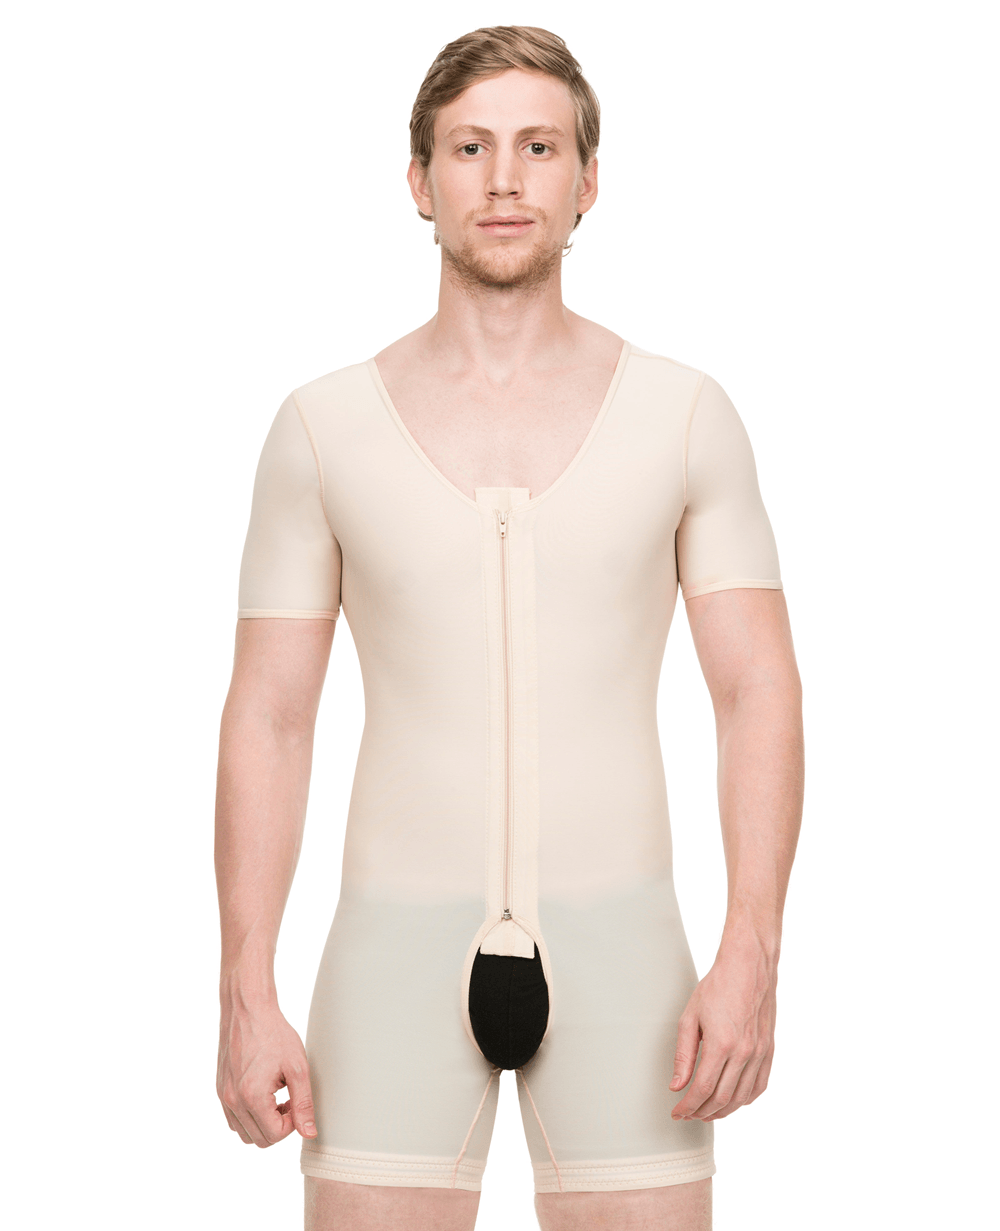  Isavela Low Waist Abdominal Above Knee Compression Girdle W/ Zipper on Both sides (GR11) (XS, Beige) : Clothing, Shoes & Jewelry